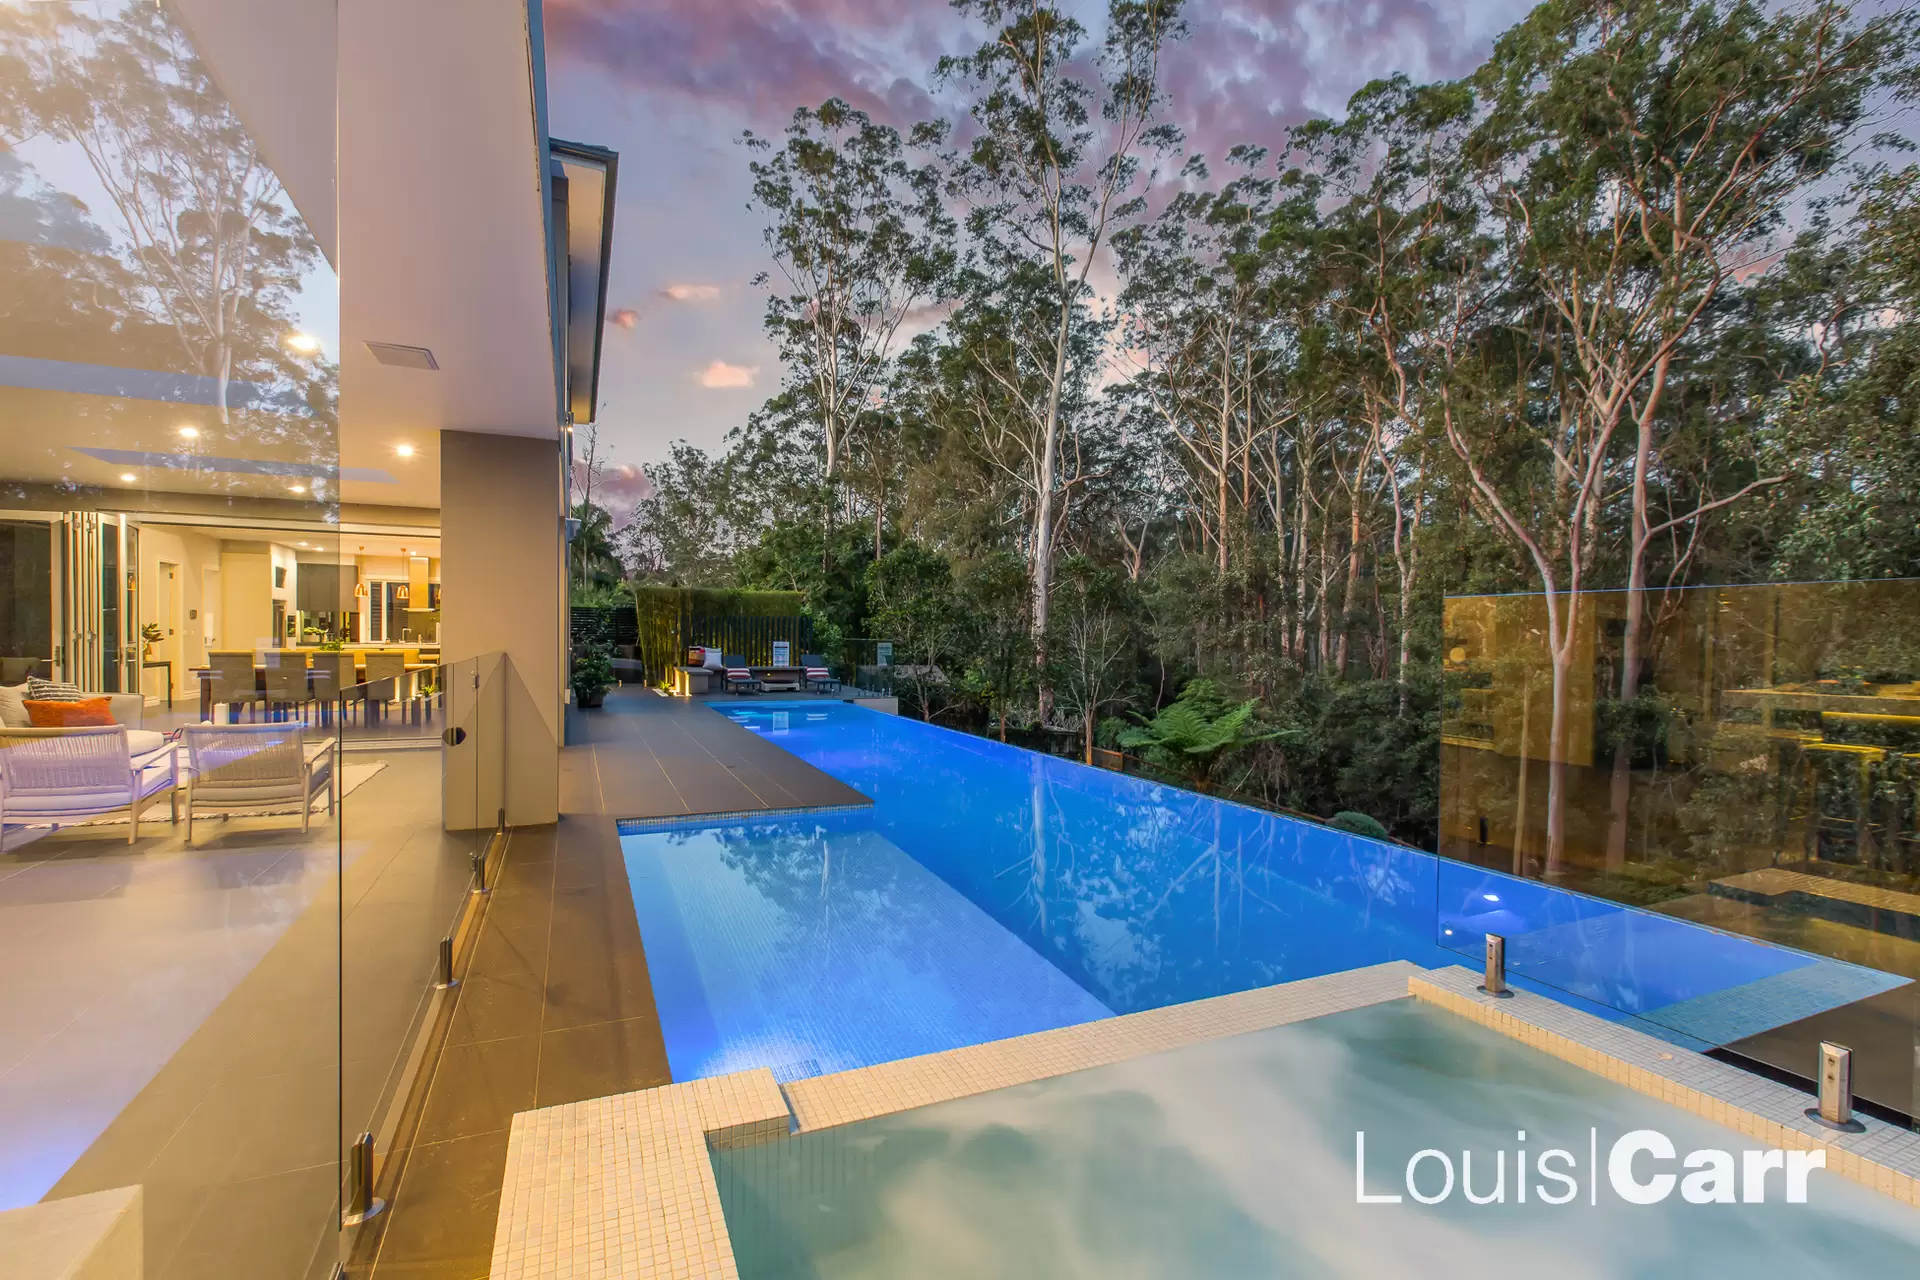 Photo #2: 10 Rodney Place, West Pennant Hills - Sold by Louis Carr Real Estate